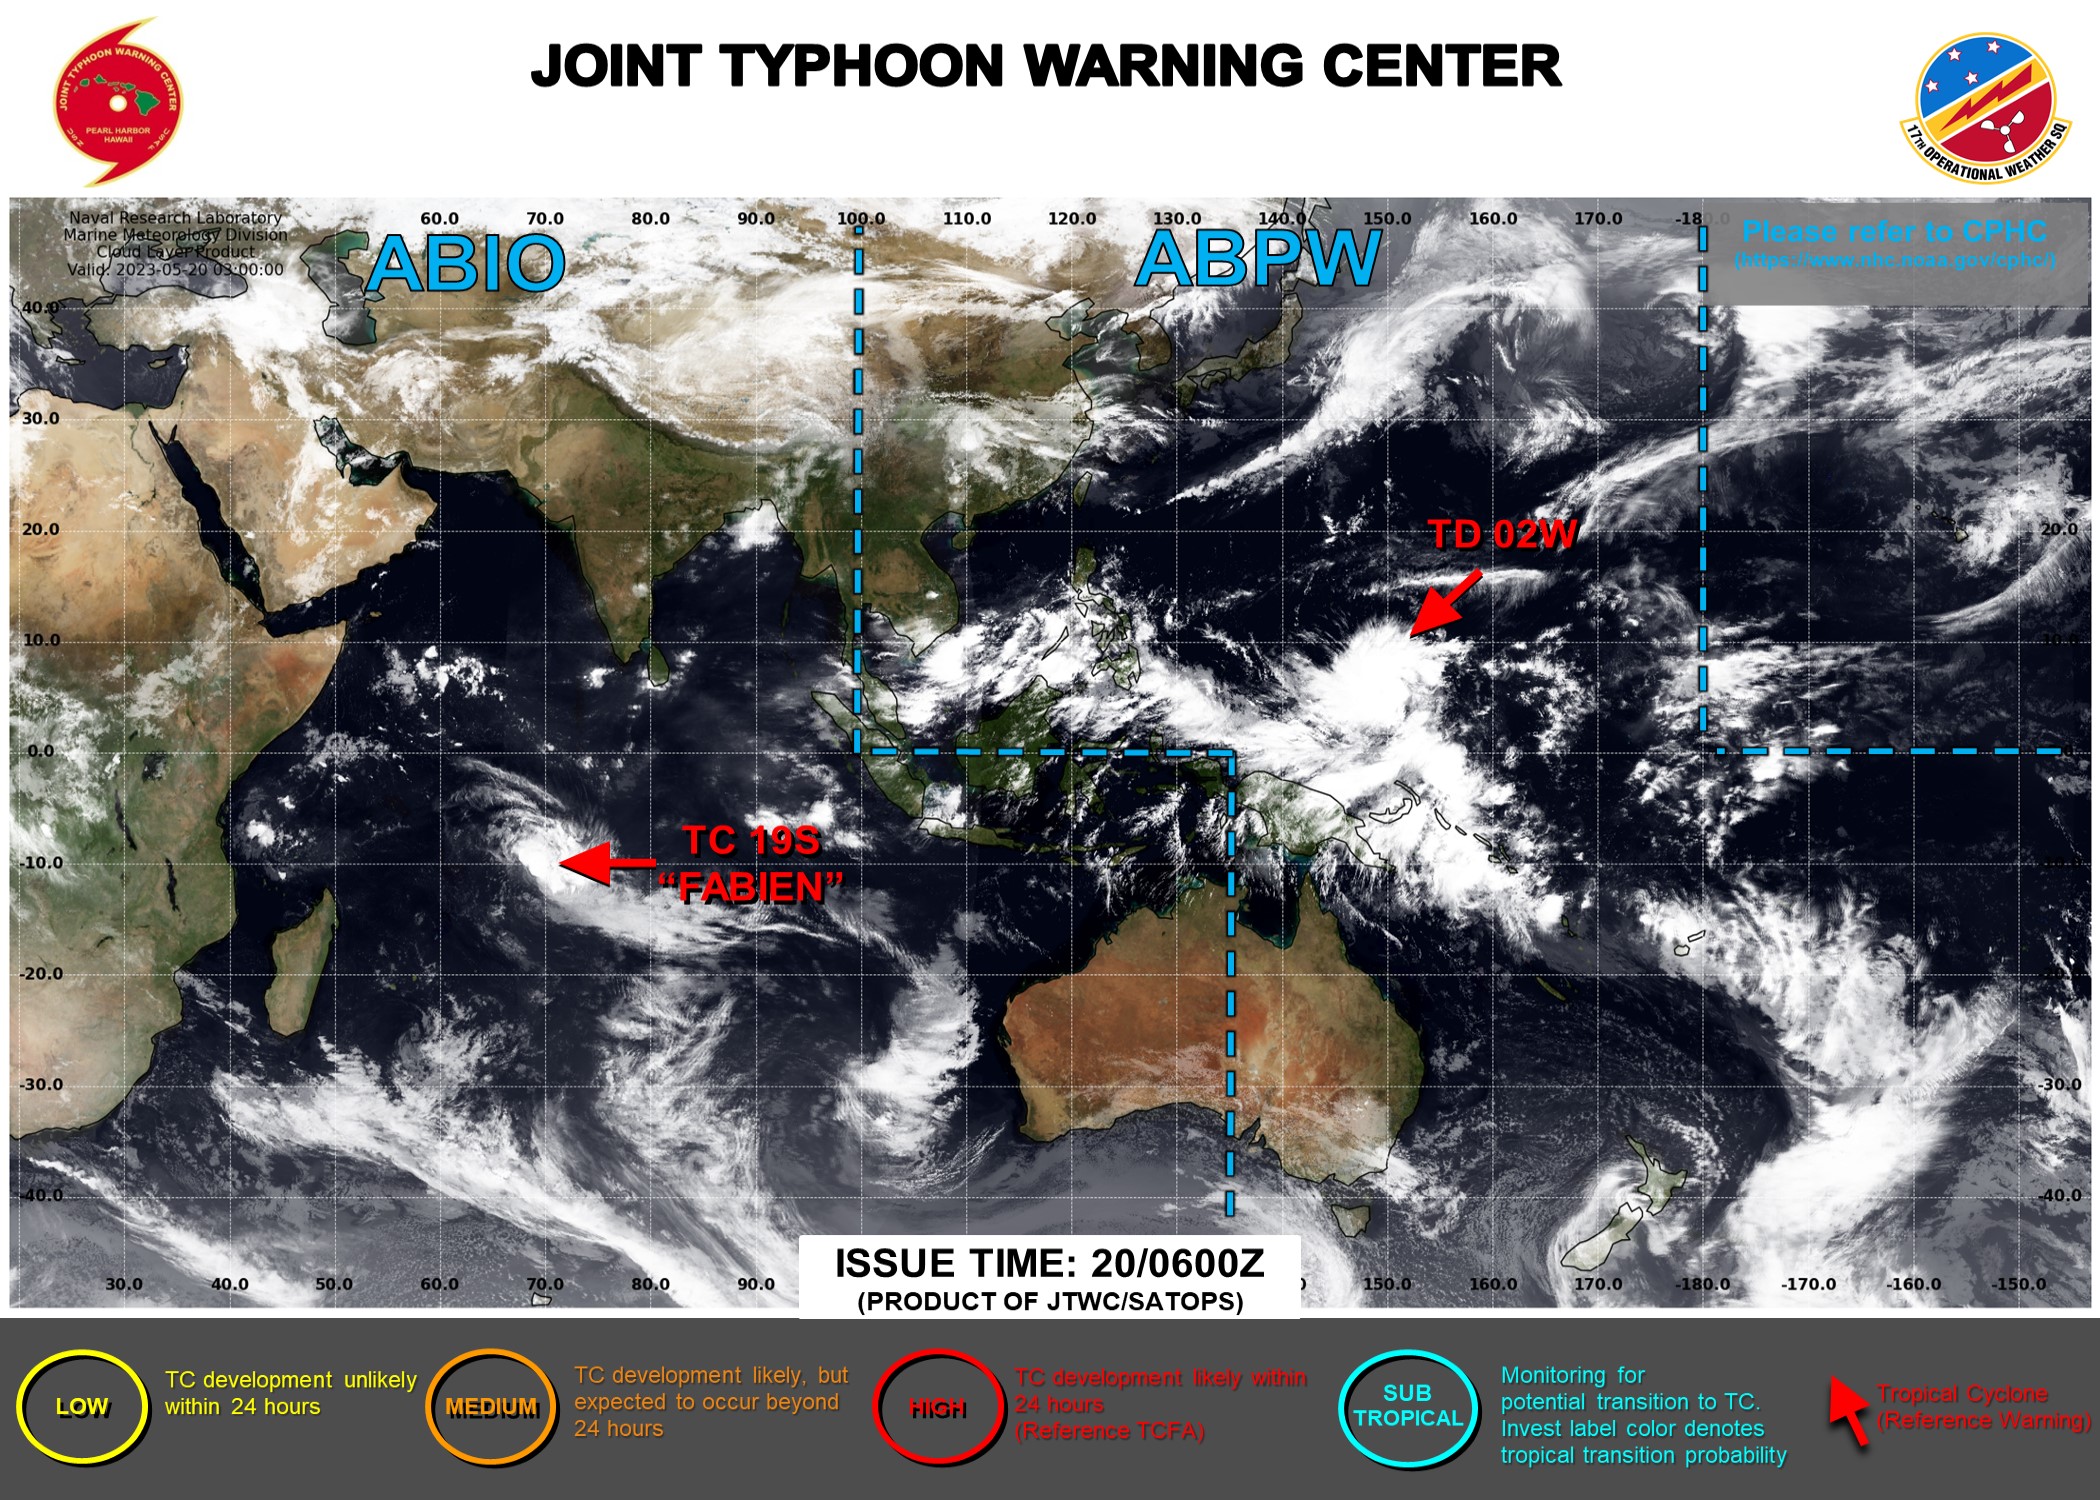 JTWC IS ISSUING 6HOURLY WARNINGS AND 3HOURLY SATELLITE BULLETINS ON TD 02W. 12HOURLY WARNINGS AND 3HOURLY SATELLITE BULLETINS ARE ISSUED ON TC 19S(FABIEN).